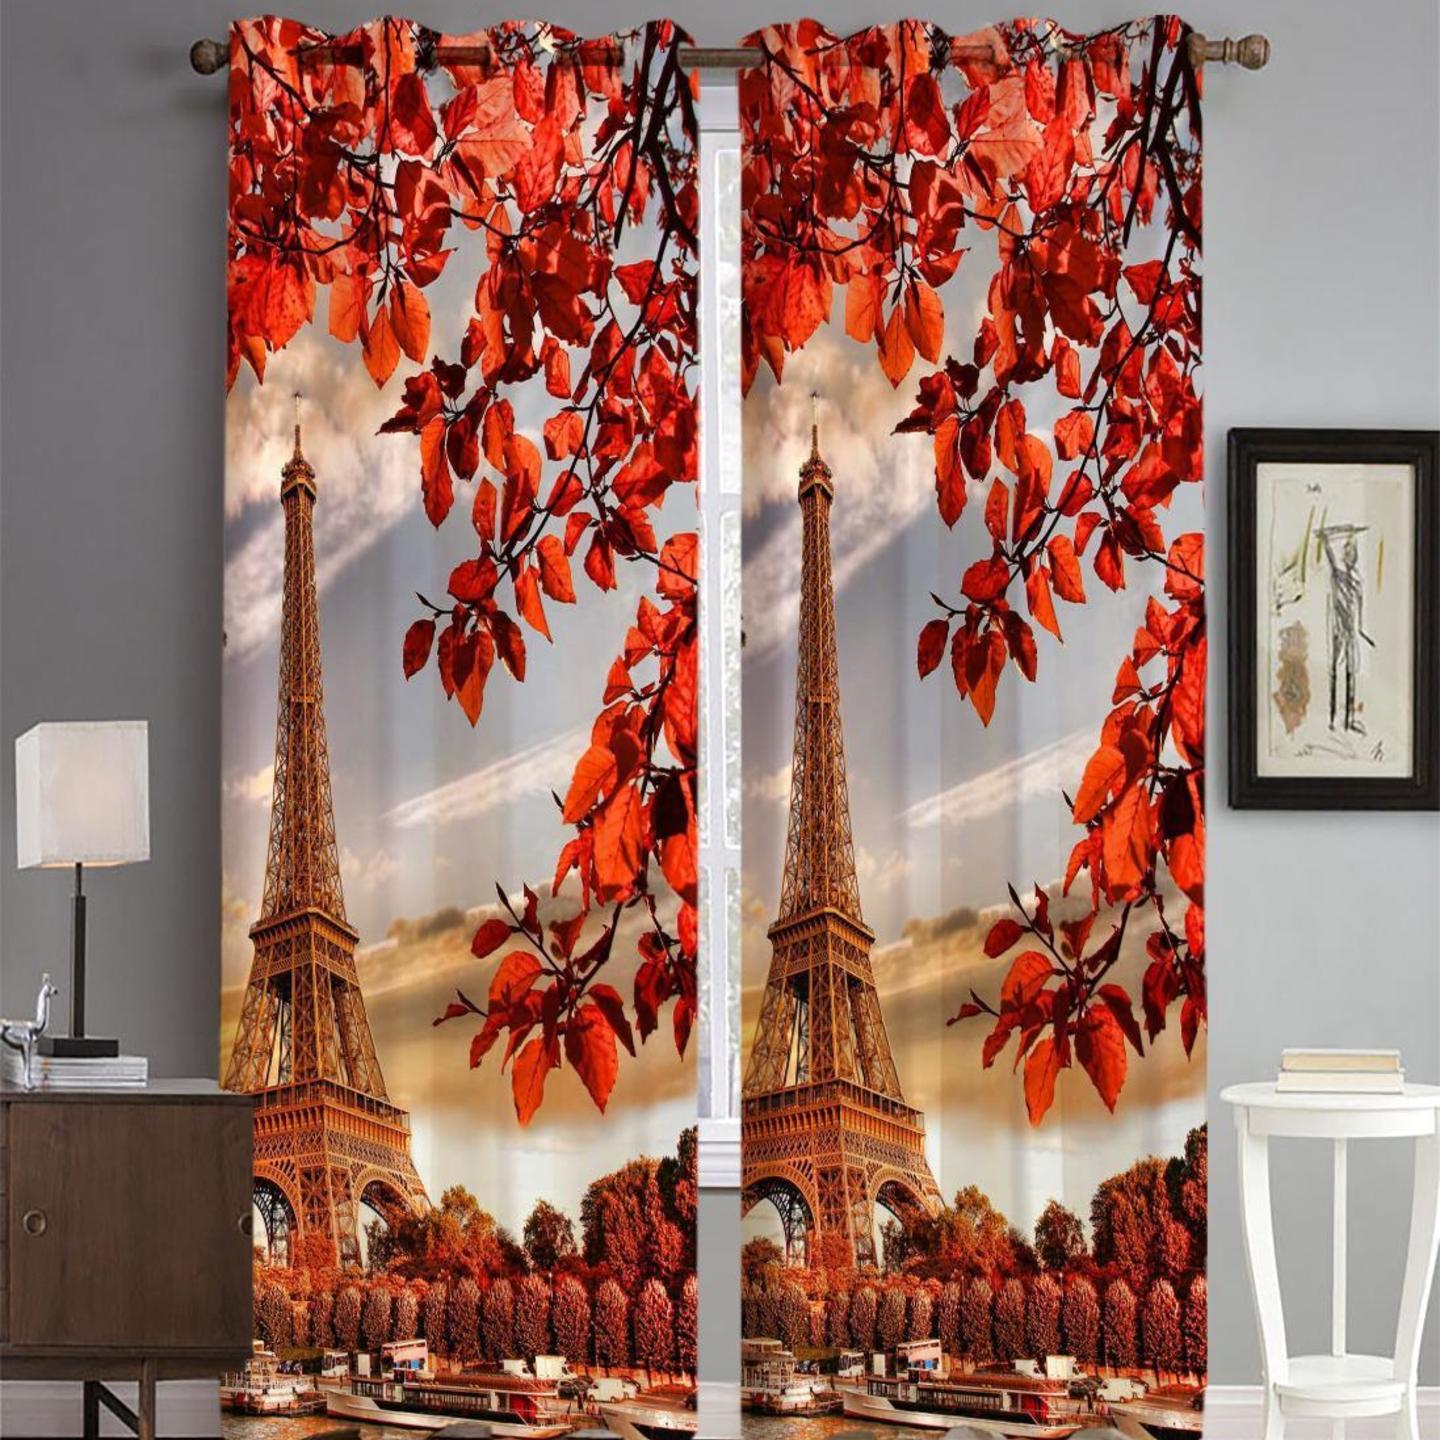 Handtex Home Heavy Fabric Digital Printed Curtain for Kids Room Decorative Washable Curtains for Living Room Bedroom Home Office Decor Set of 2 4x7